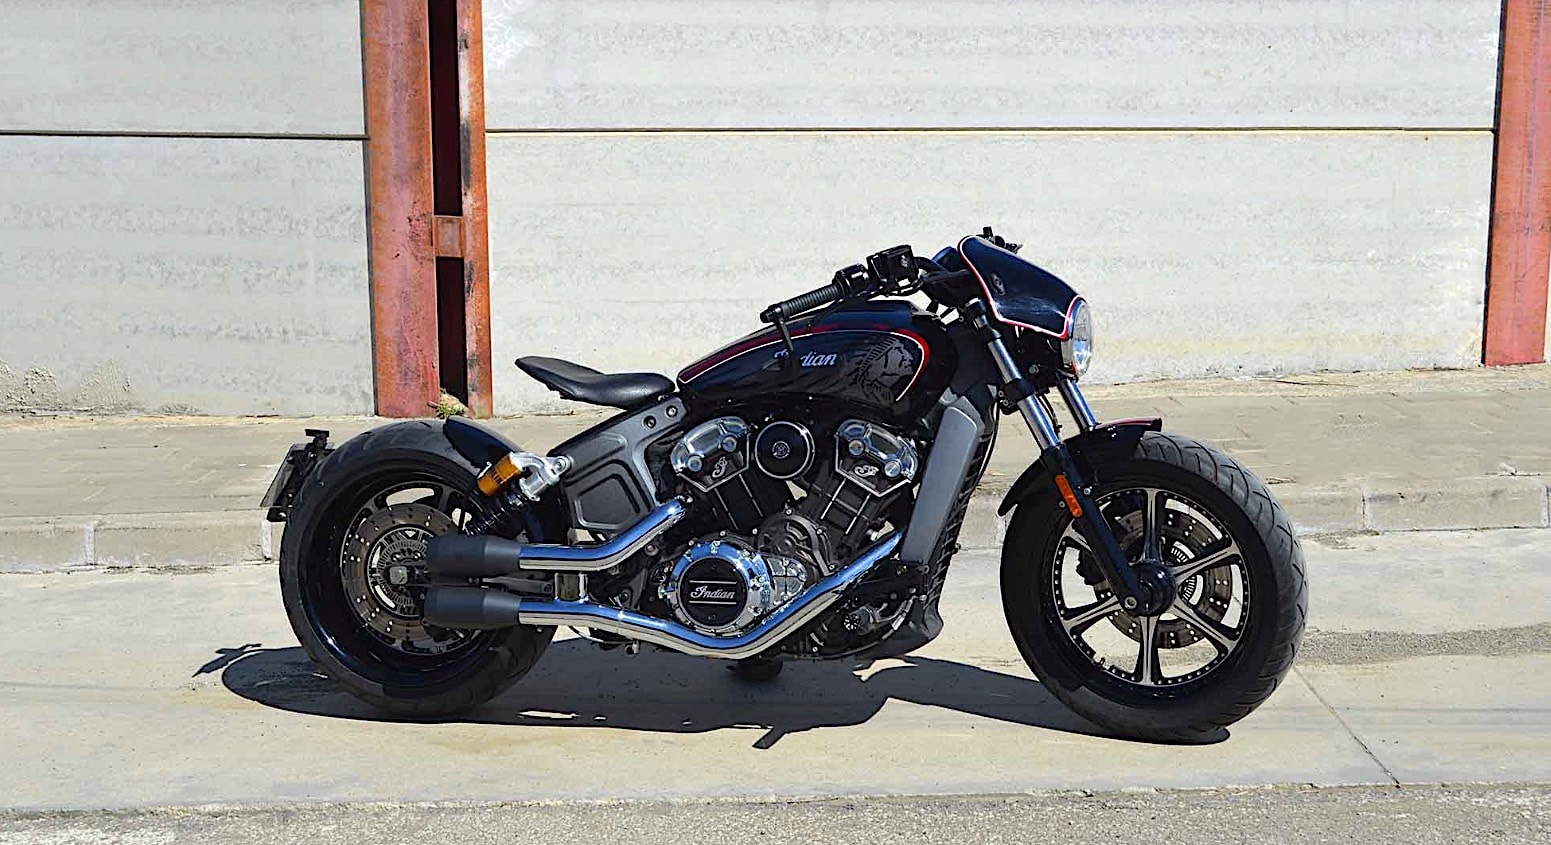 https://s1.cdn.autoevolution.com/images/news/indian-scout-bobber-240-looks-ready-to-eat-harley-davidsons-for-breakfast-221456_1.jpg